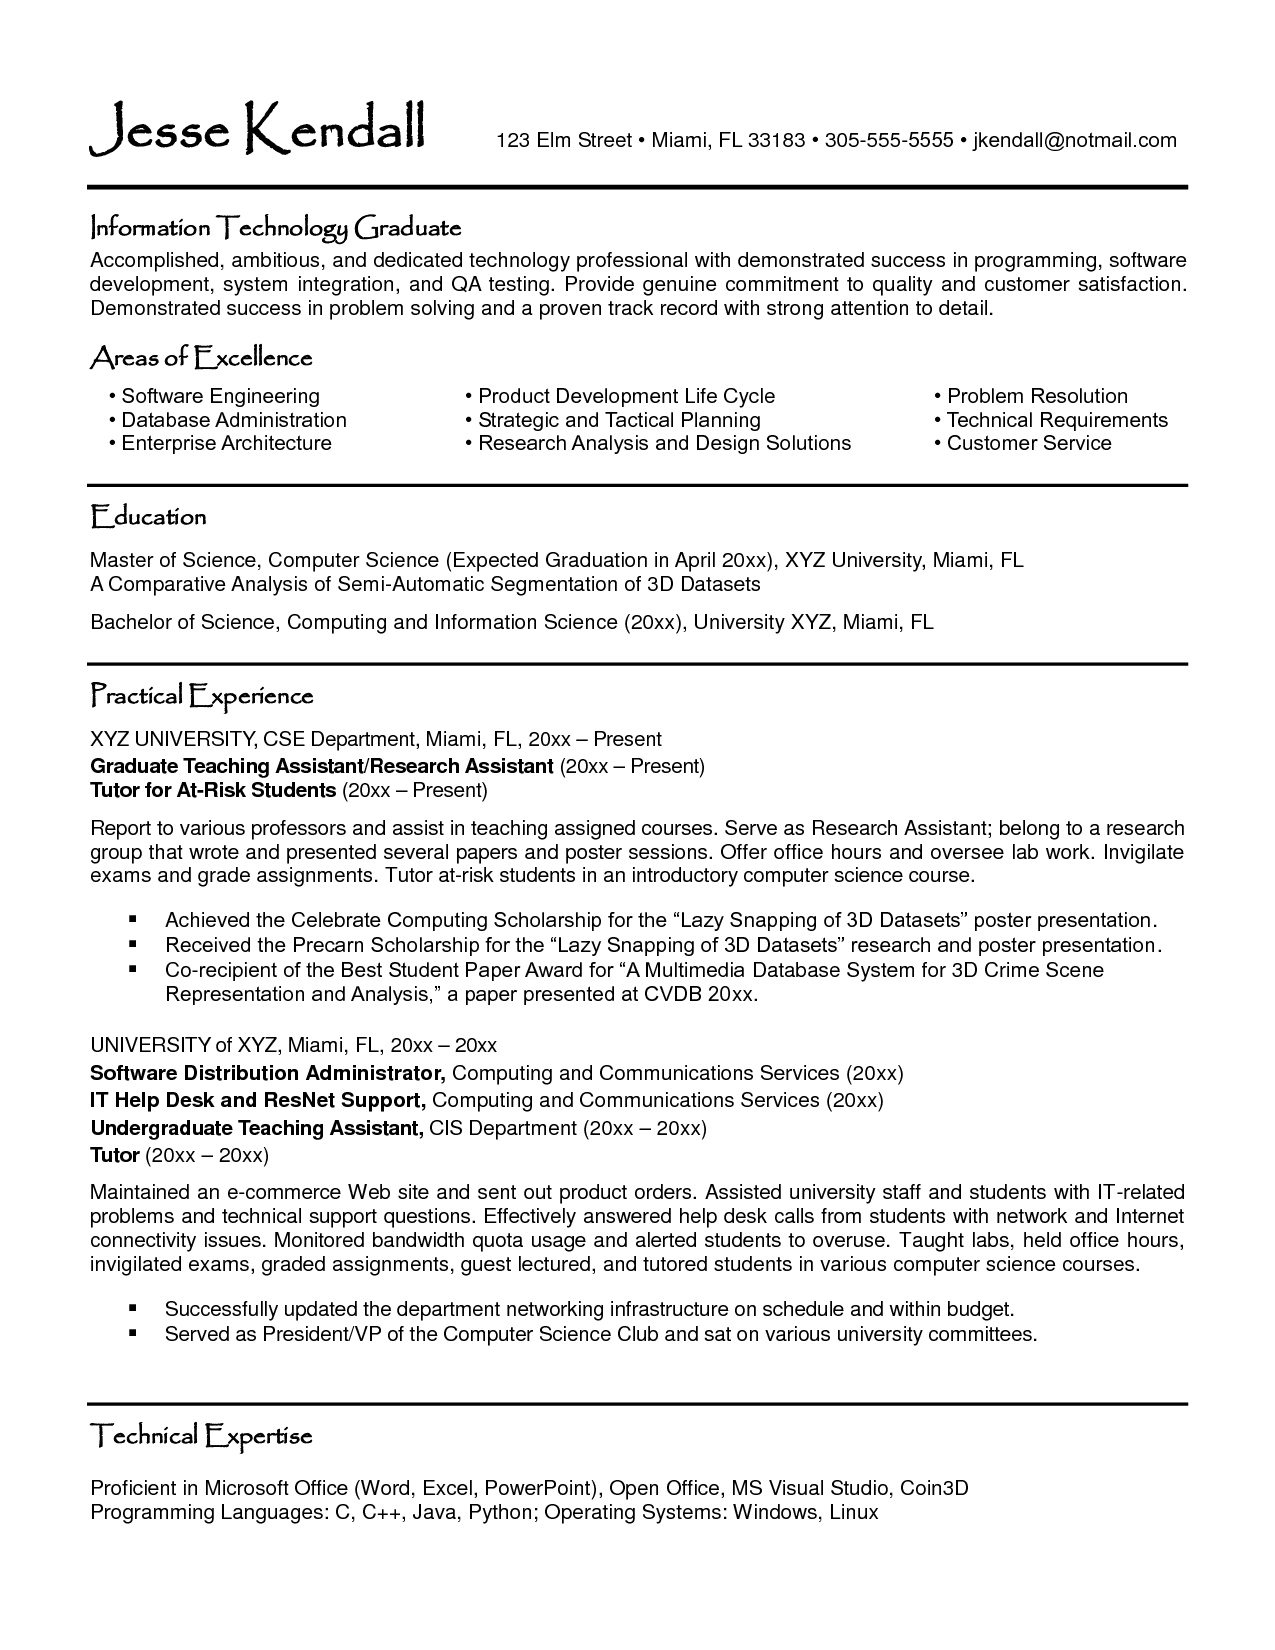 scholarship-resume-template-50-college-student-resume-templates-format-templatelab-if